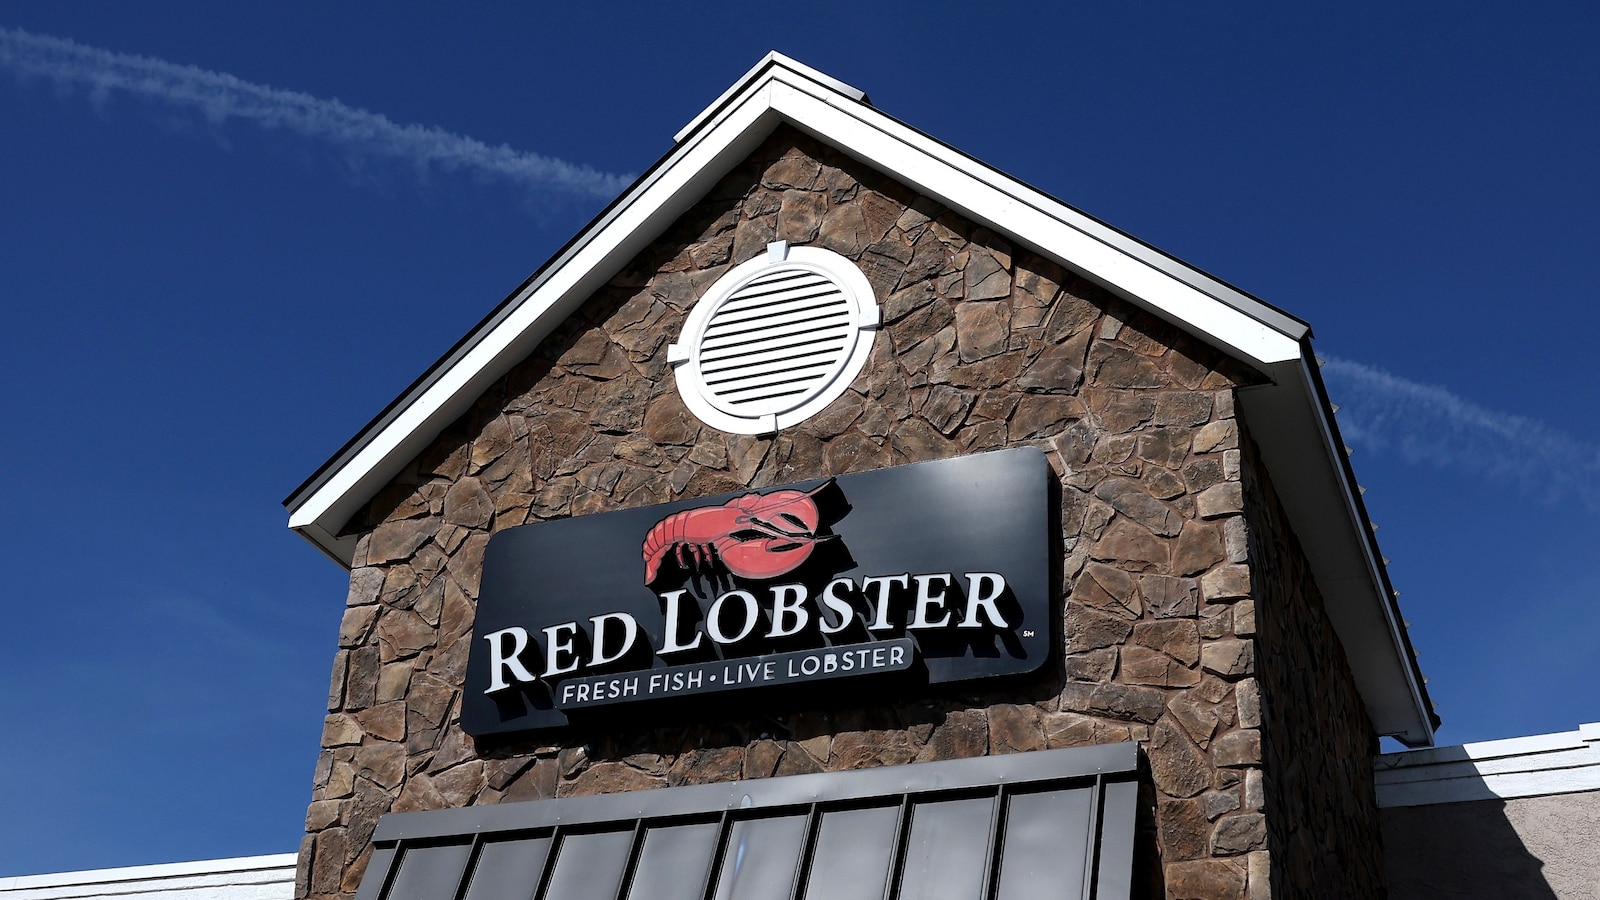 Red Lobster closes dozens of locations for months after 'endless shrimp losses'